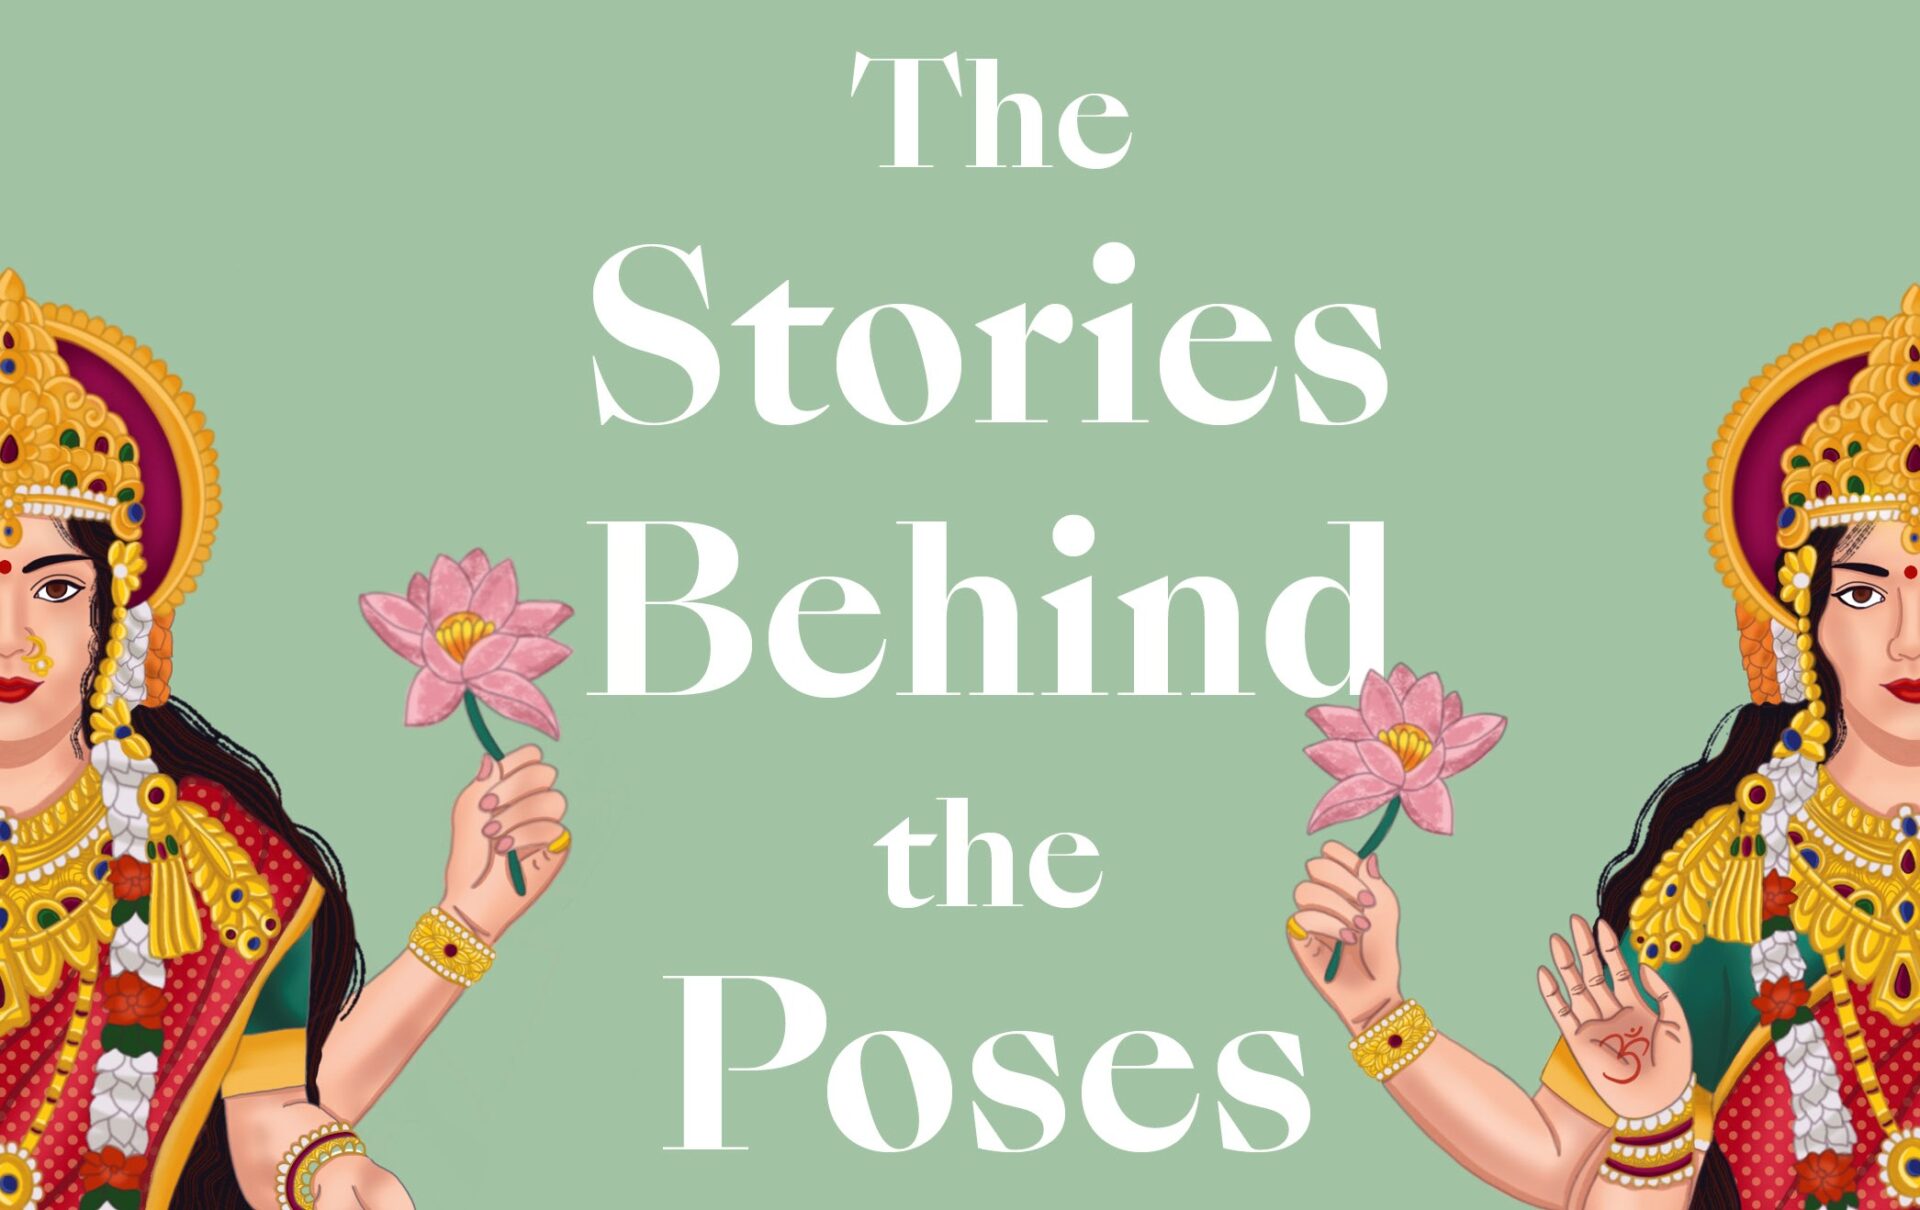 The Stories Behind the Poses